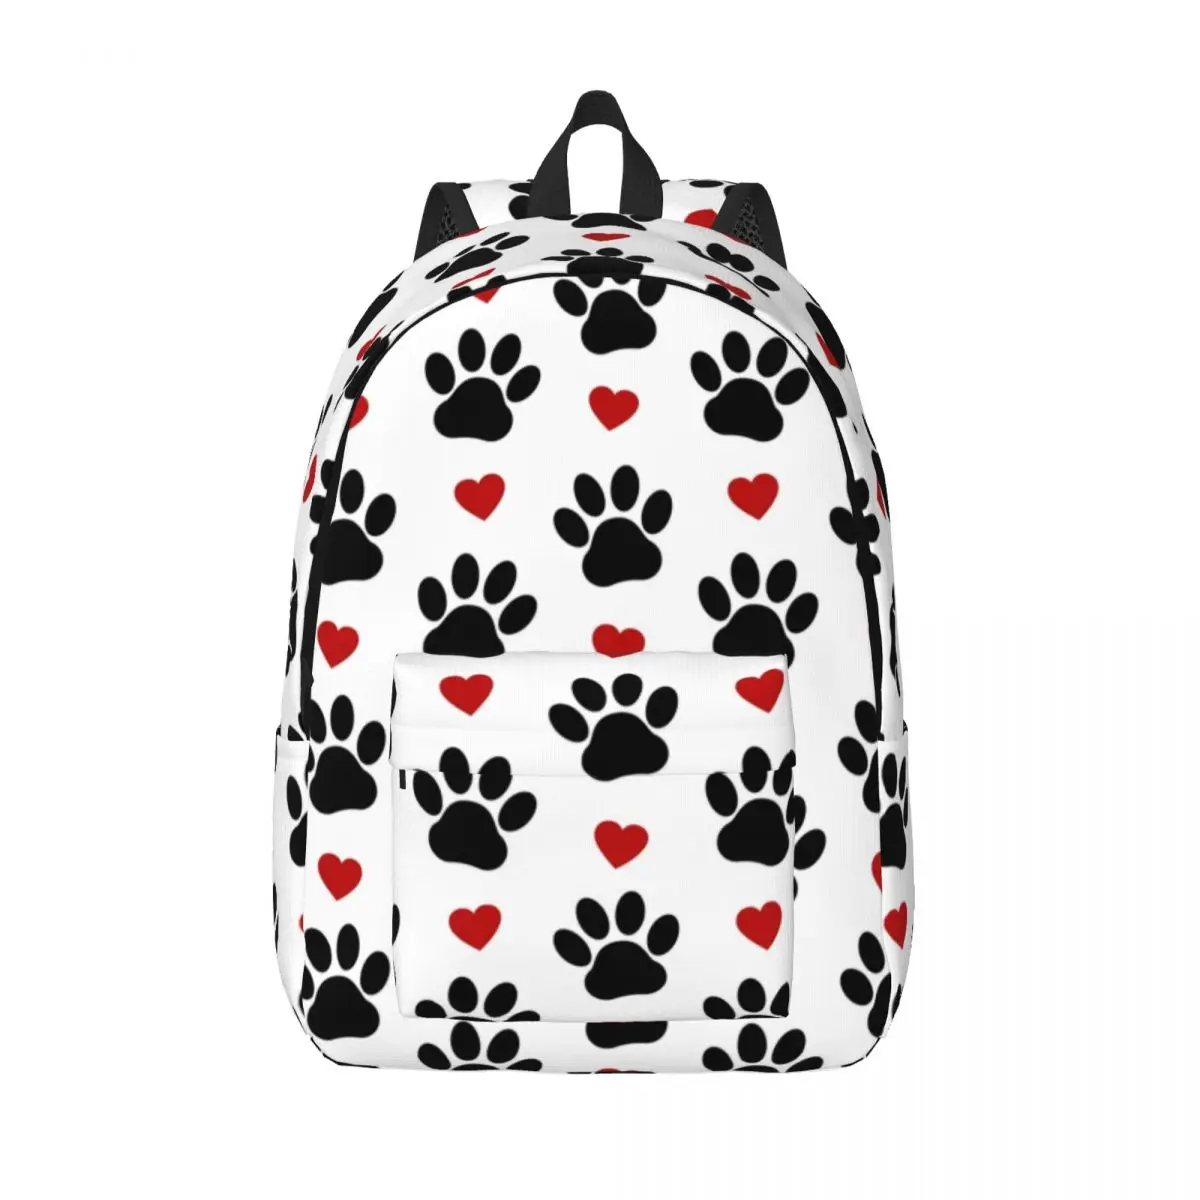 

Customized Pattern Of Dog Paw Canvas Backpack Women Men Basic Bookbag for College School Black Paws Red Hearts Bags